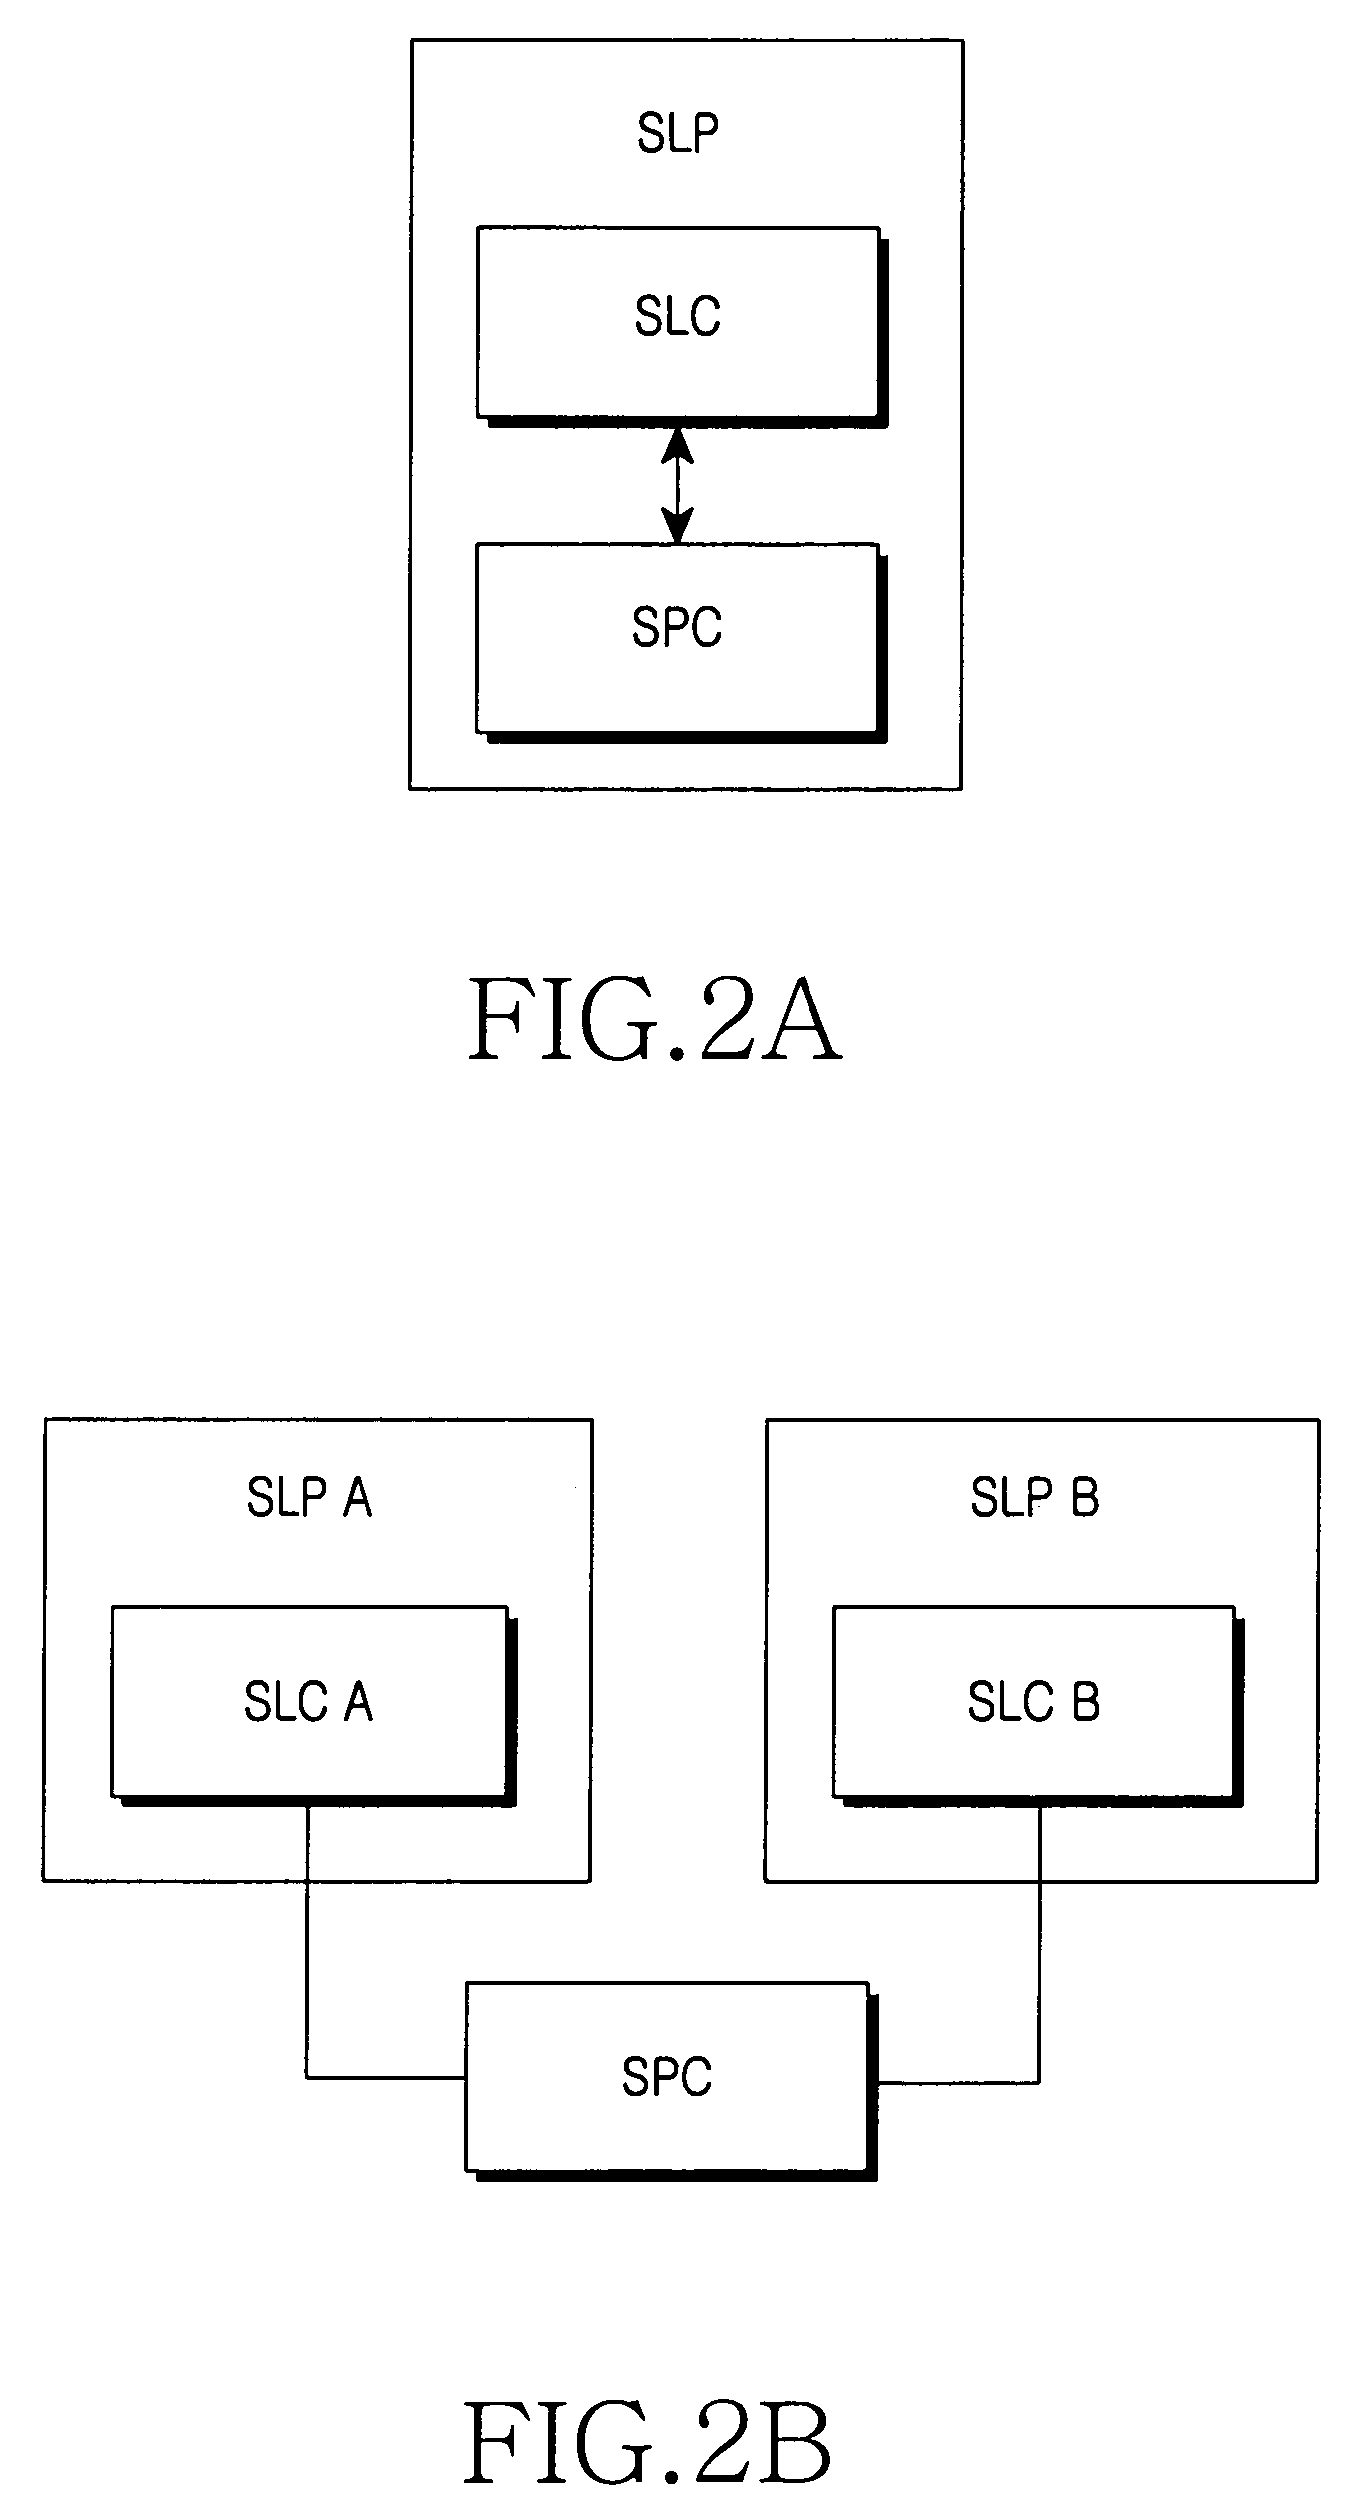 Method for determining location of UE by using AGPS information